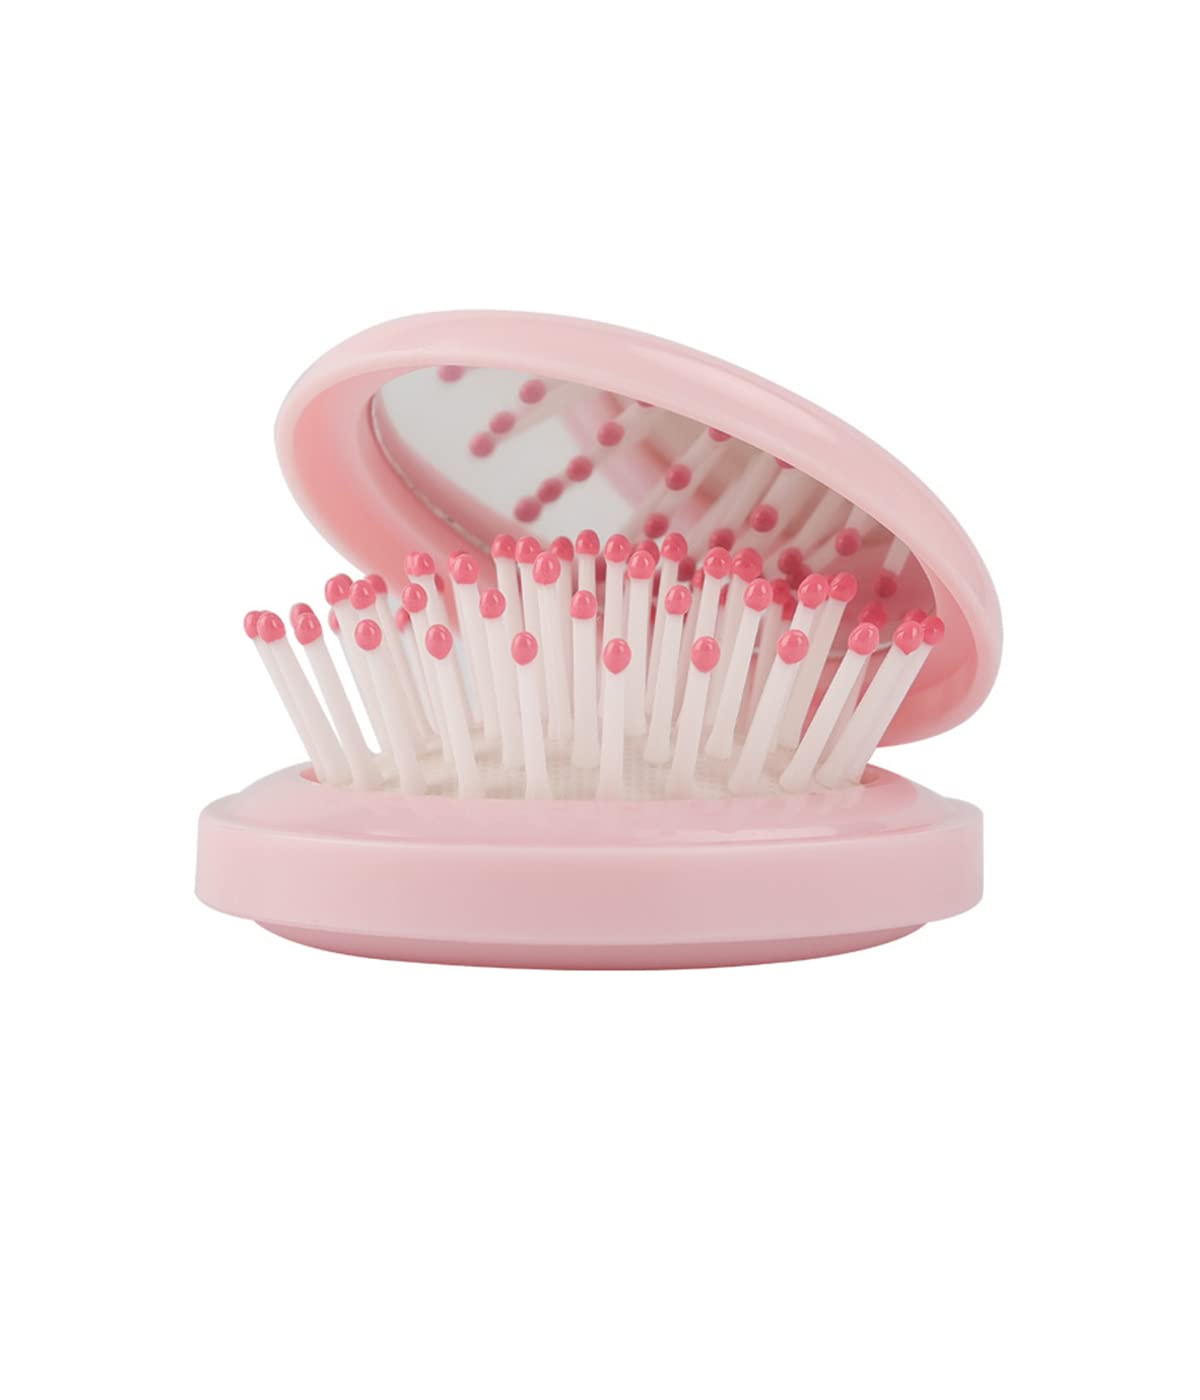 qccige Hairdressing Comb Foldable Hair Brush with Mirror Round Portable Foldable Hair Brush Mini Hair Brush Compact Travel Size Hair Massage Comb for Men and Women - Pink, ‎multicoloured